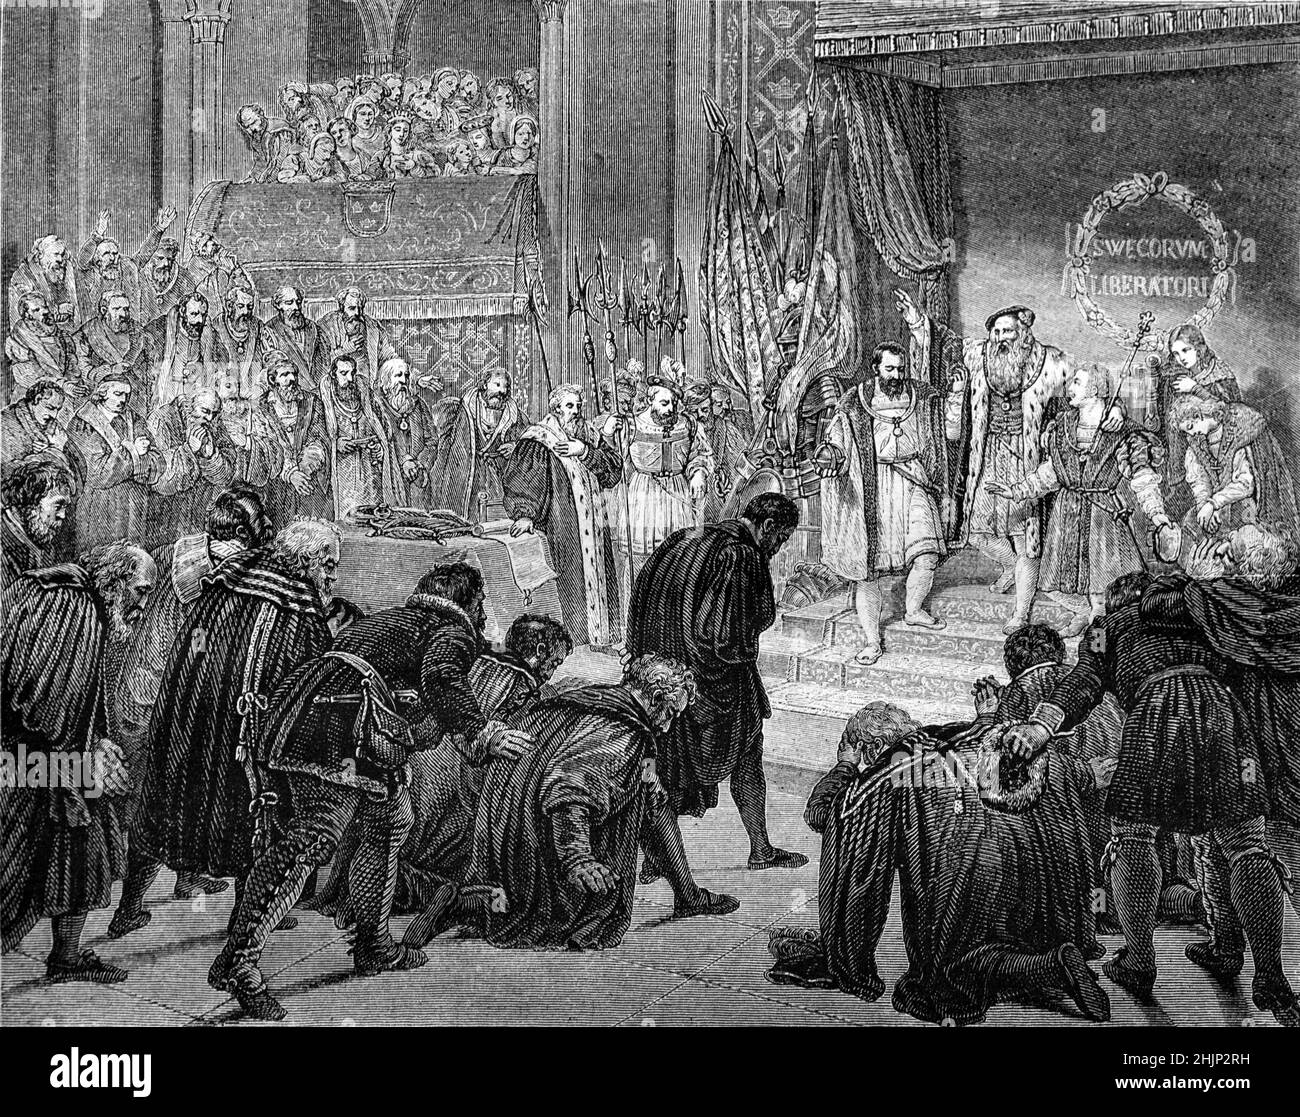 Abdication of King Gustav Vasa (1496-1560). The image shows a scene from 1544 when King Gustav I of Sweden, abolished Sweden's elective monarchy and replaced it with a hereditary monarchy or absolute monarchy under the House of Vasa. 1865 Vintage Illustration or Engraving. Stock Photo